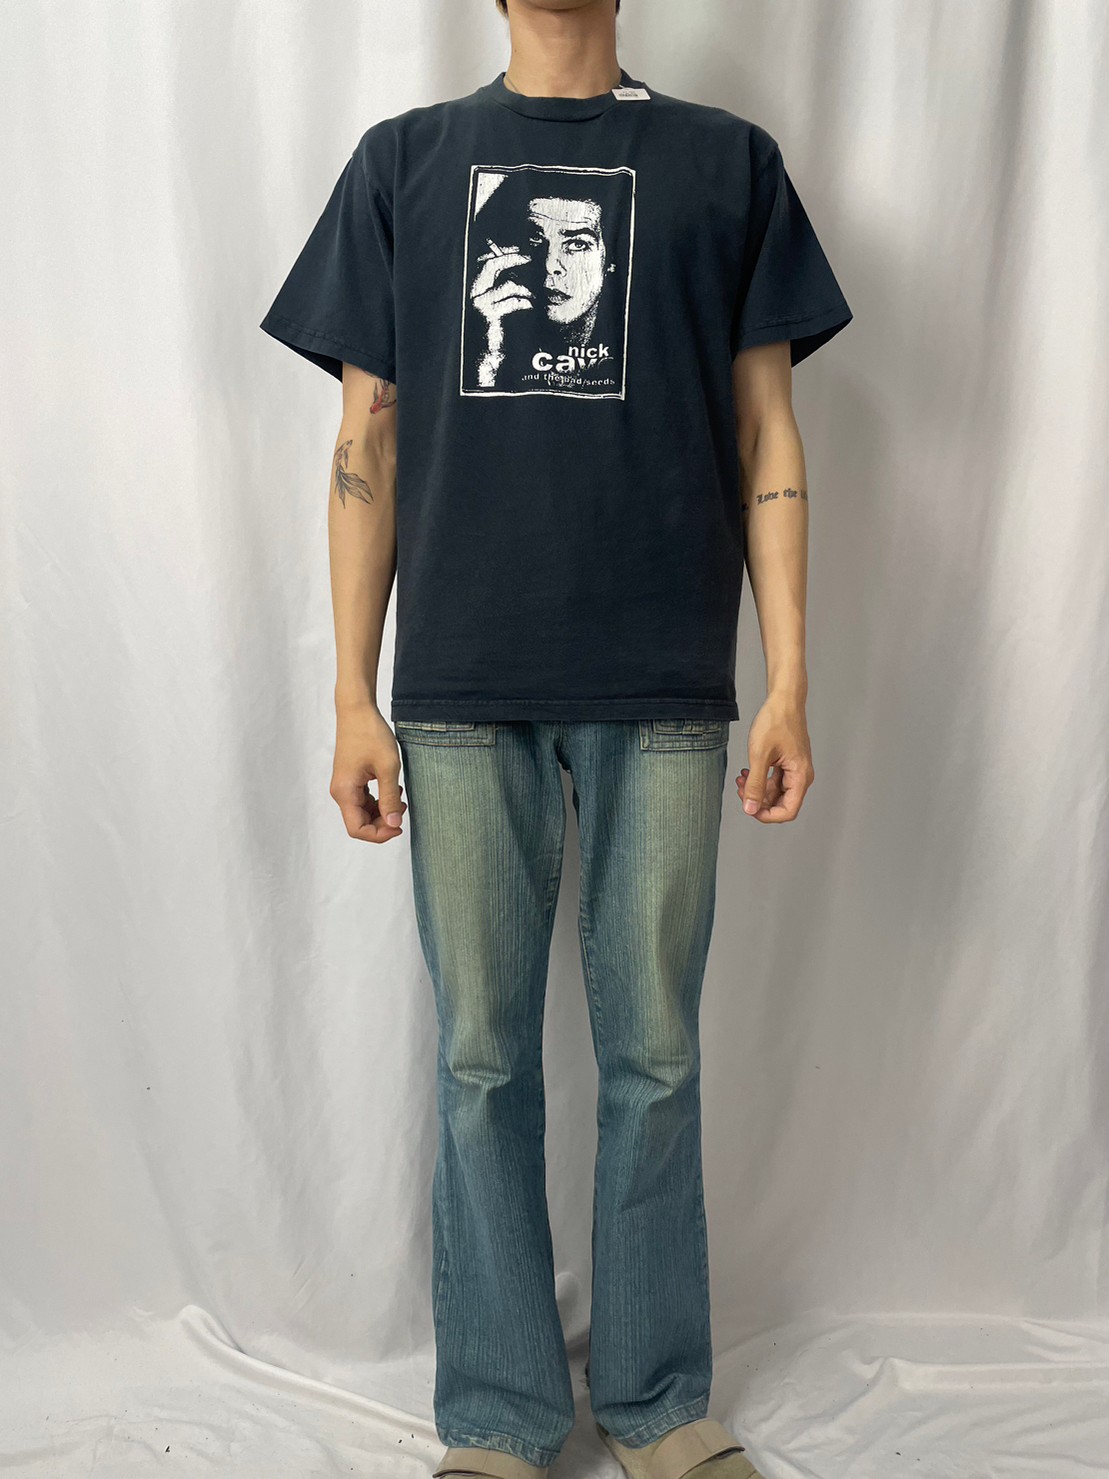 Nick Cave and the Bad Seeds ロックバンドTシャツ L